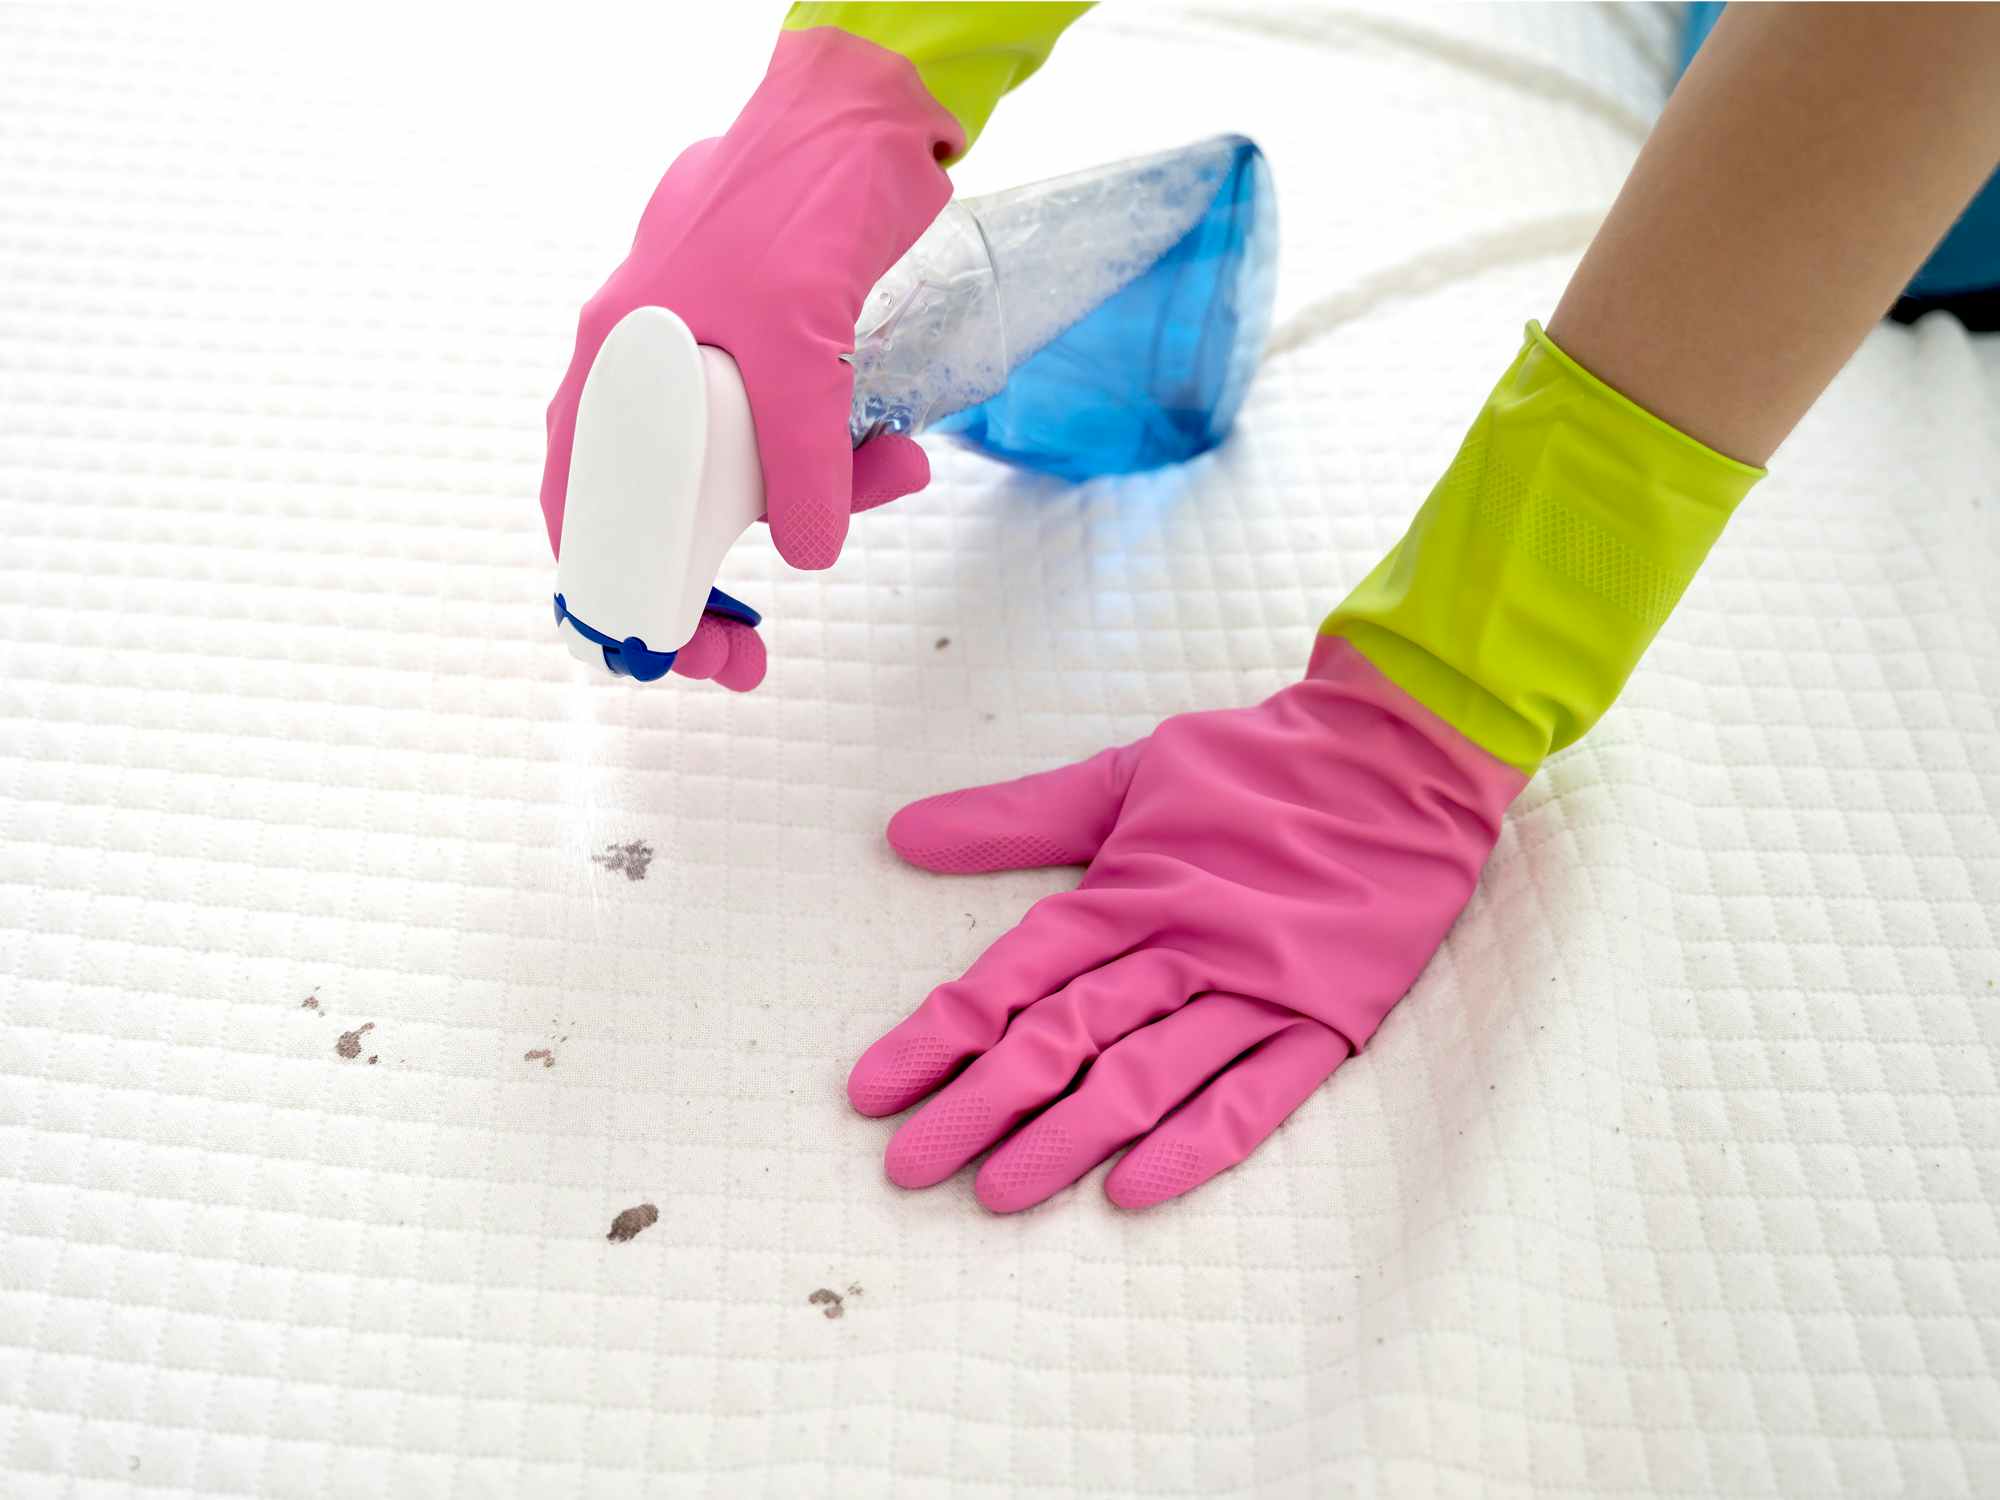 person with gloves spraying cleaning solution on mattress